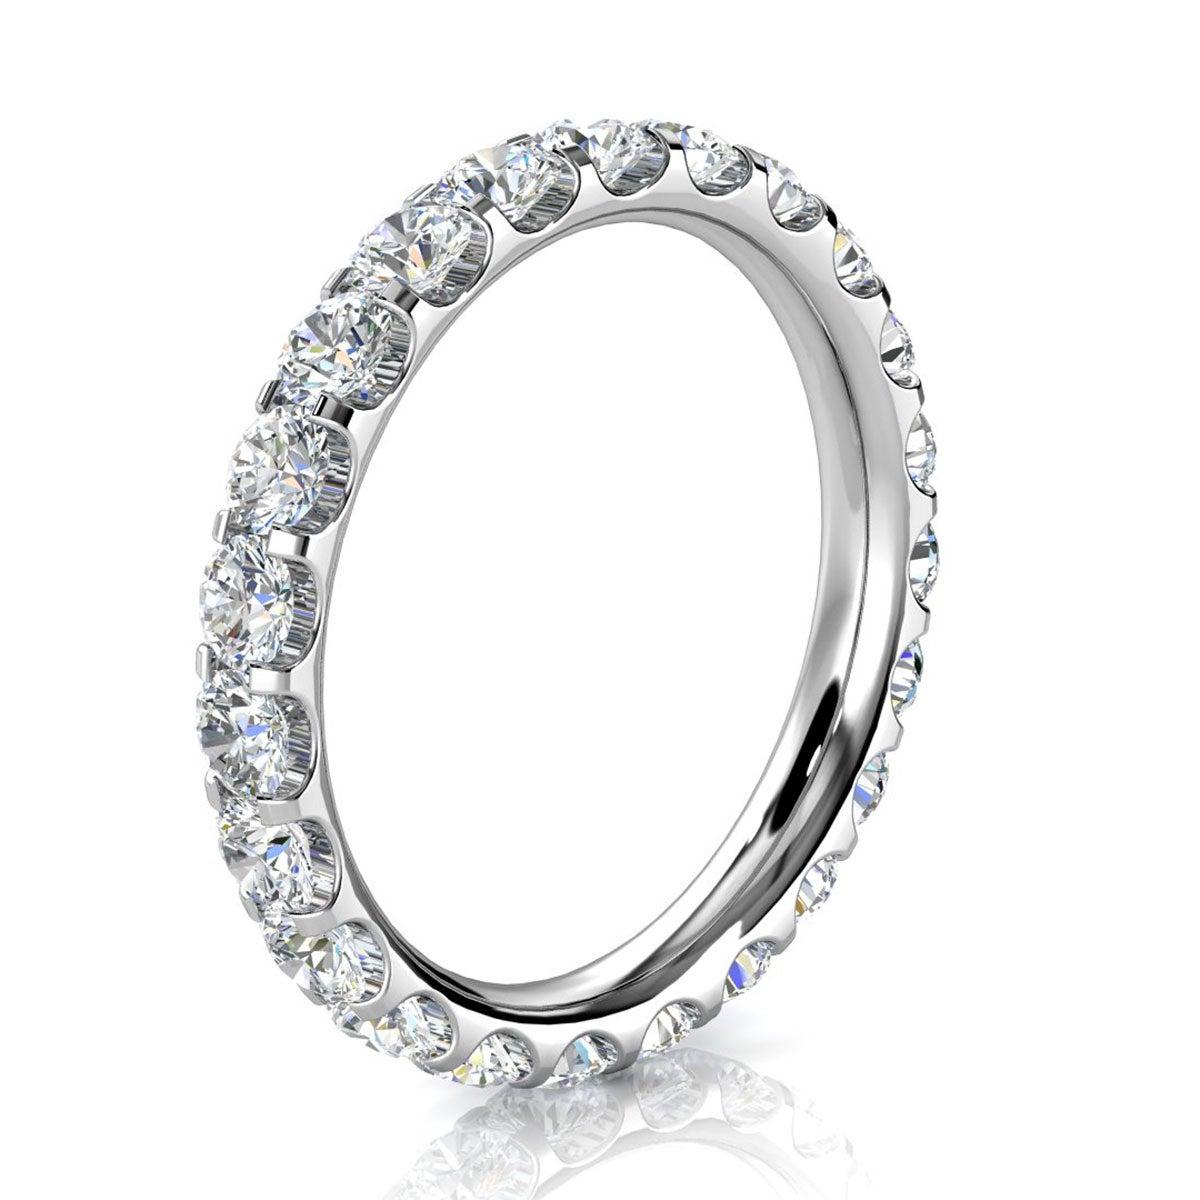 For Sale:  14k White Gold Viola Eternity Micro-Prong Diamond Ring '1 1/2 Ct. Tw' 2